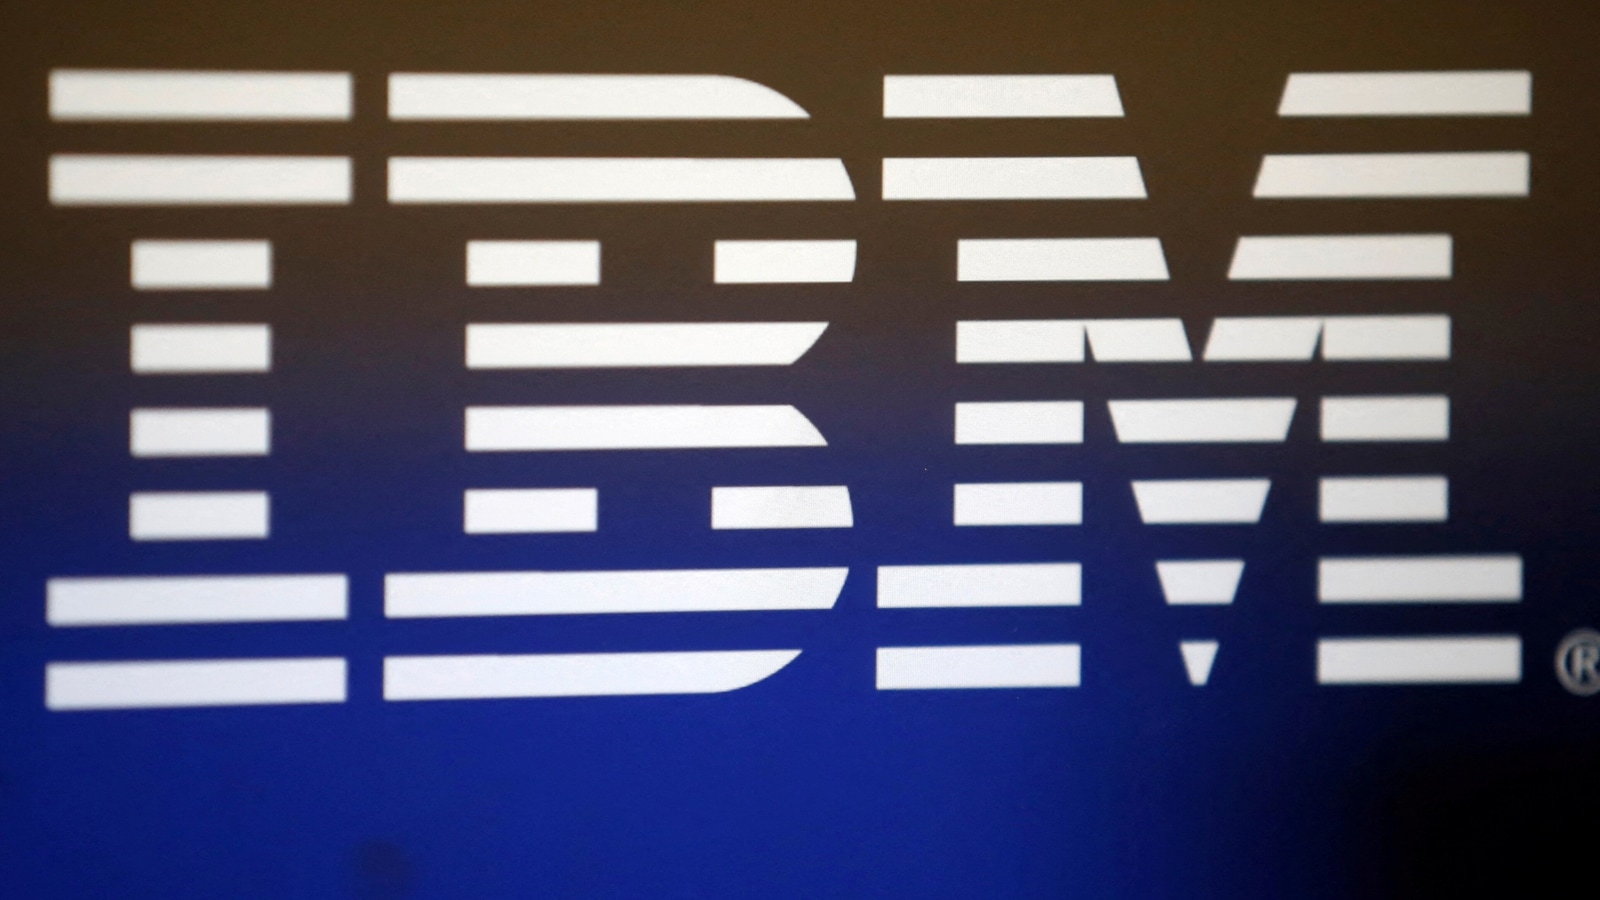 Tech layoffs IBM cuts 3,900 jobs after missing annual target